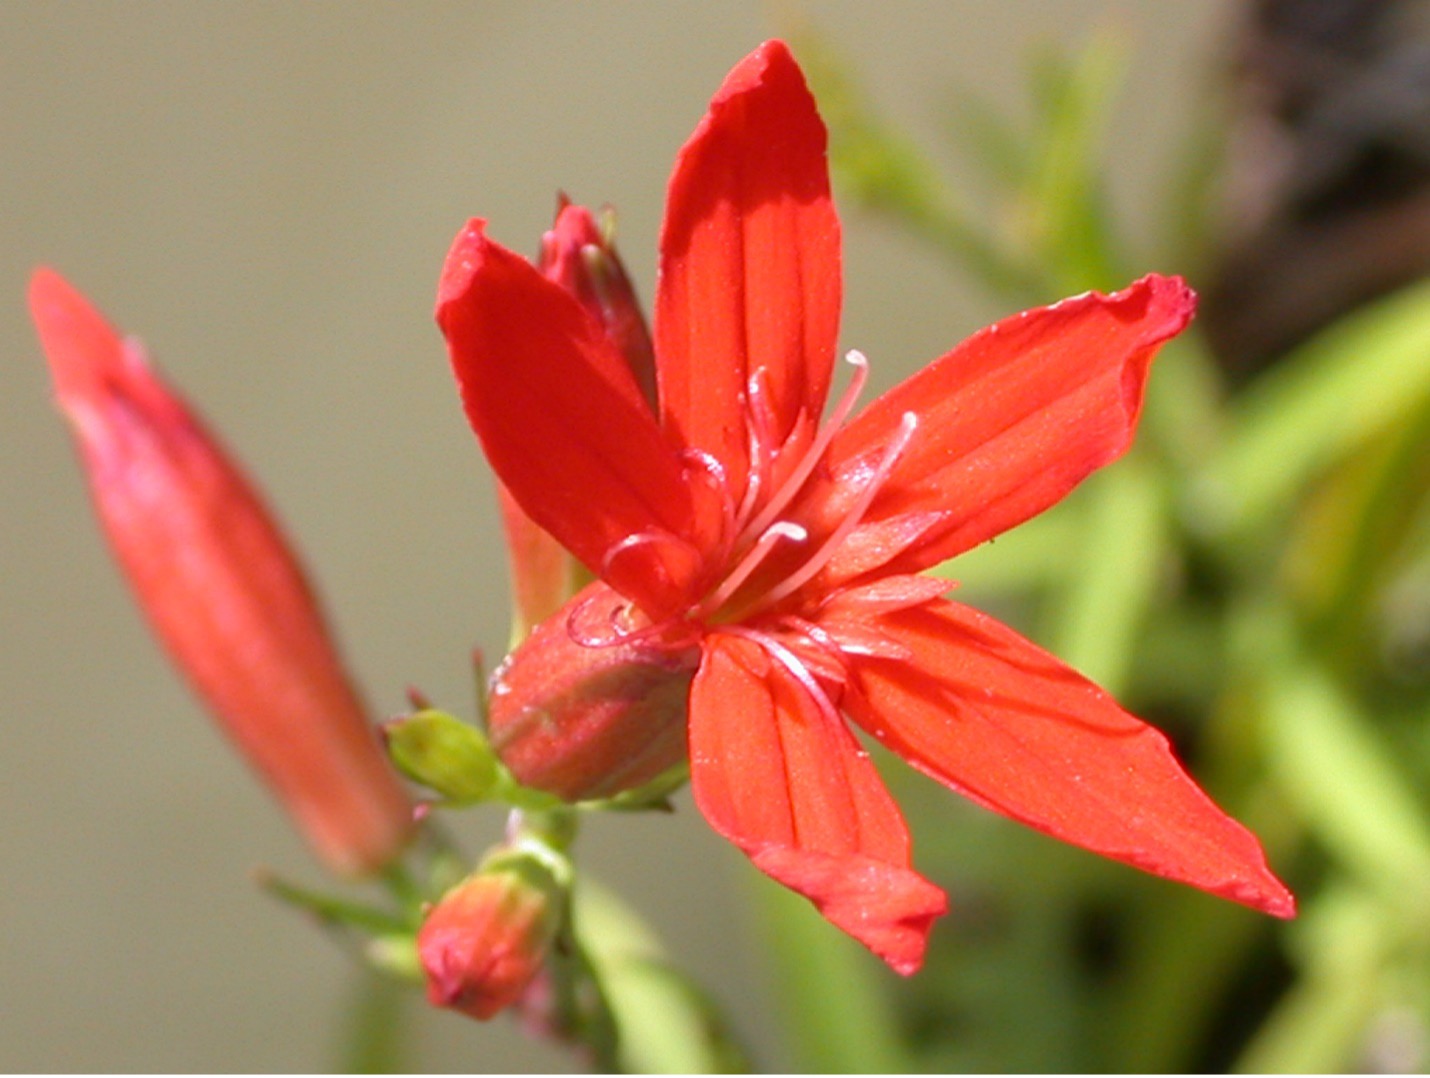 Image of a bright red blooming flower